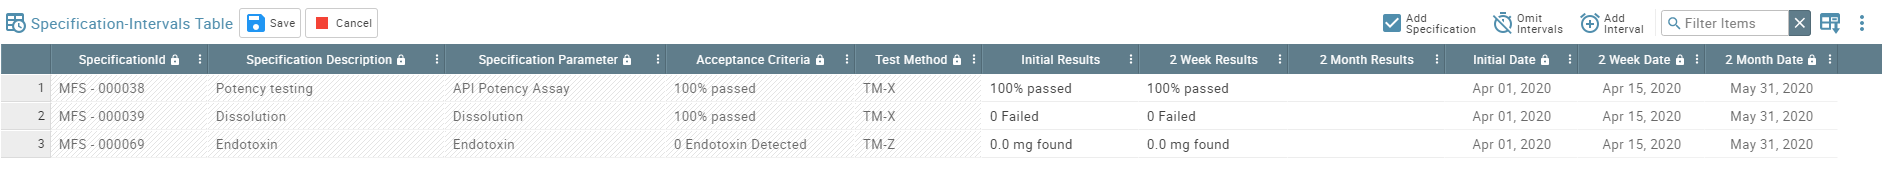 screenshot featuring a table of specification intervals